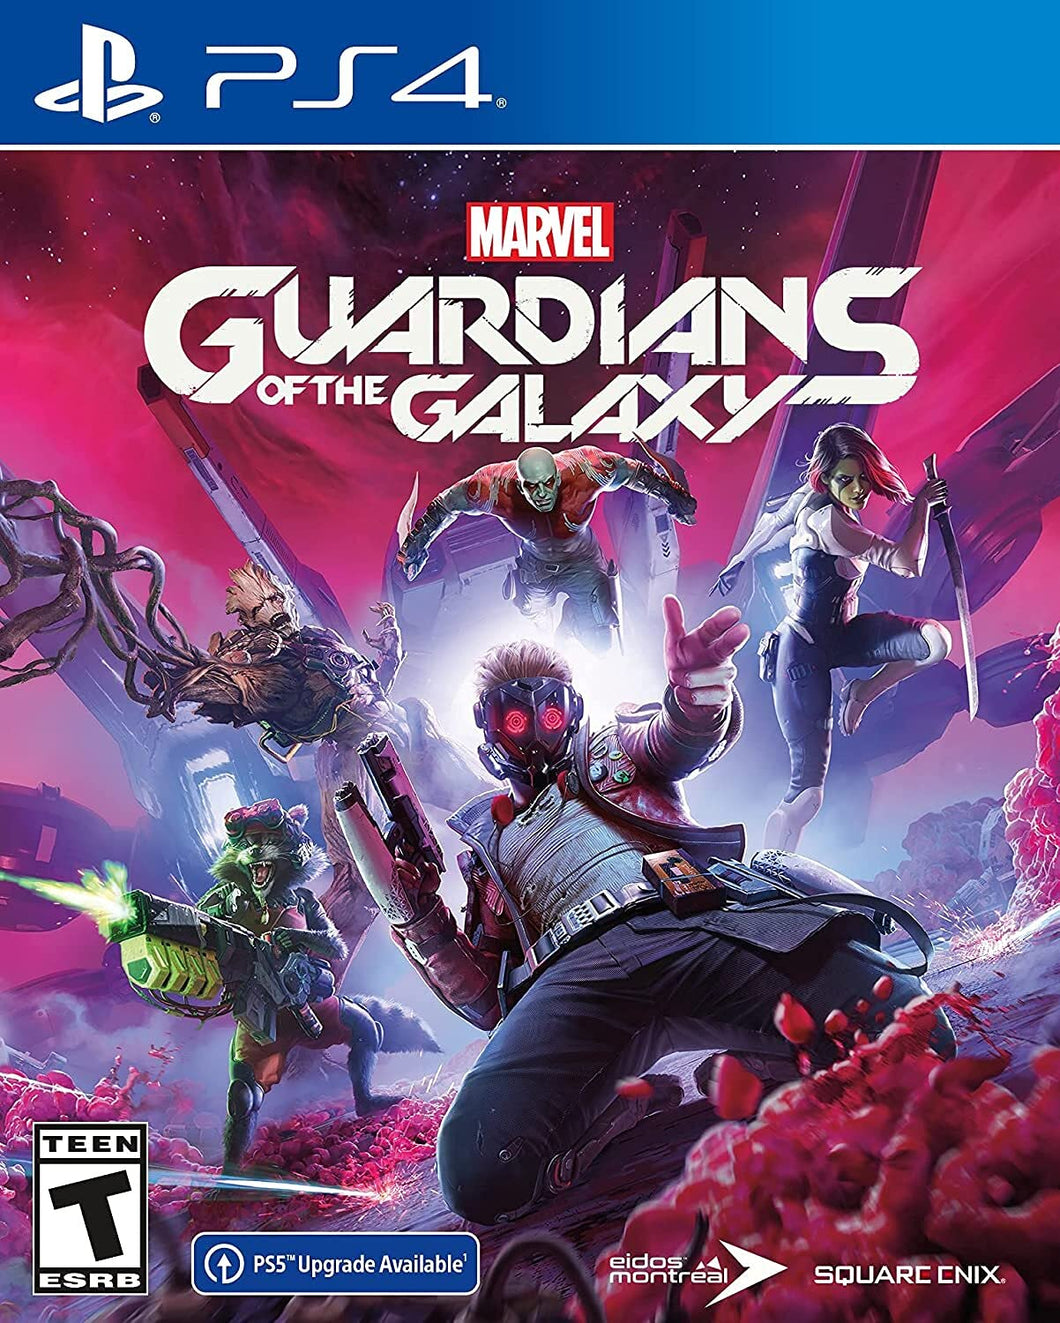 MARVELS GUARDIANS OF THE GALAXY (PS4) NEW